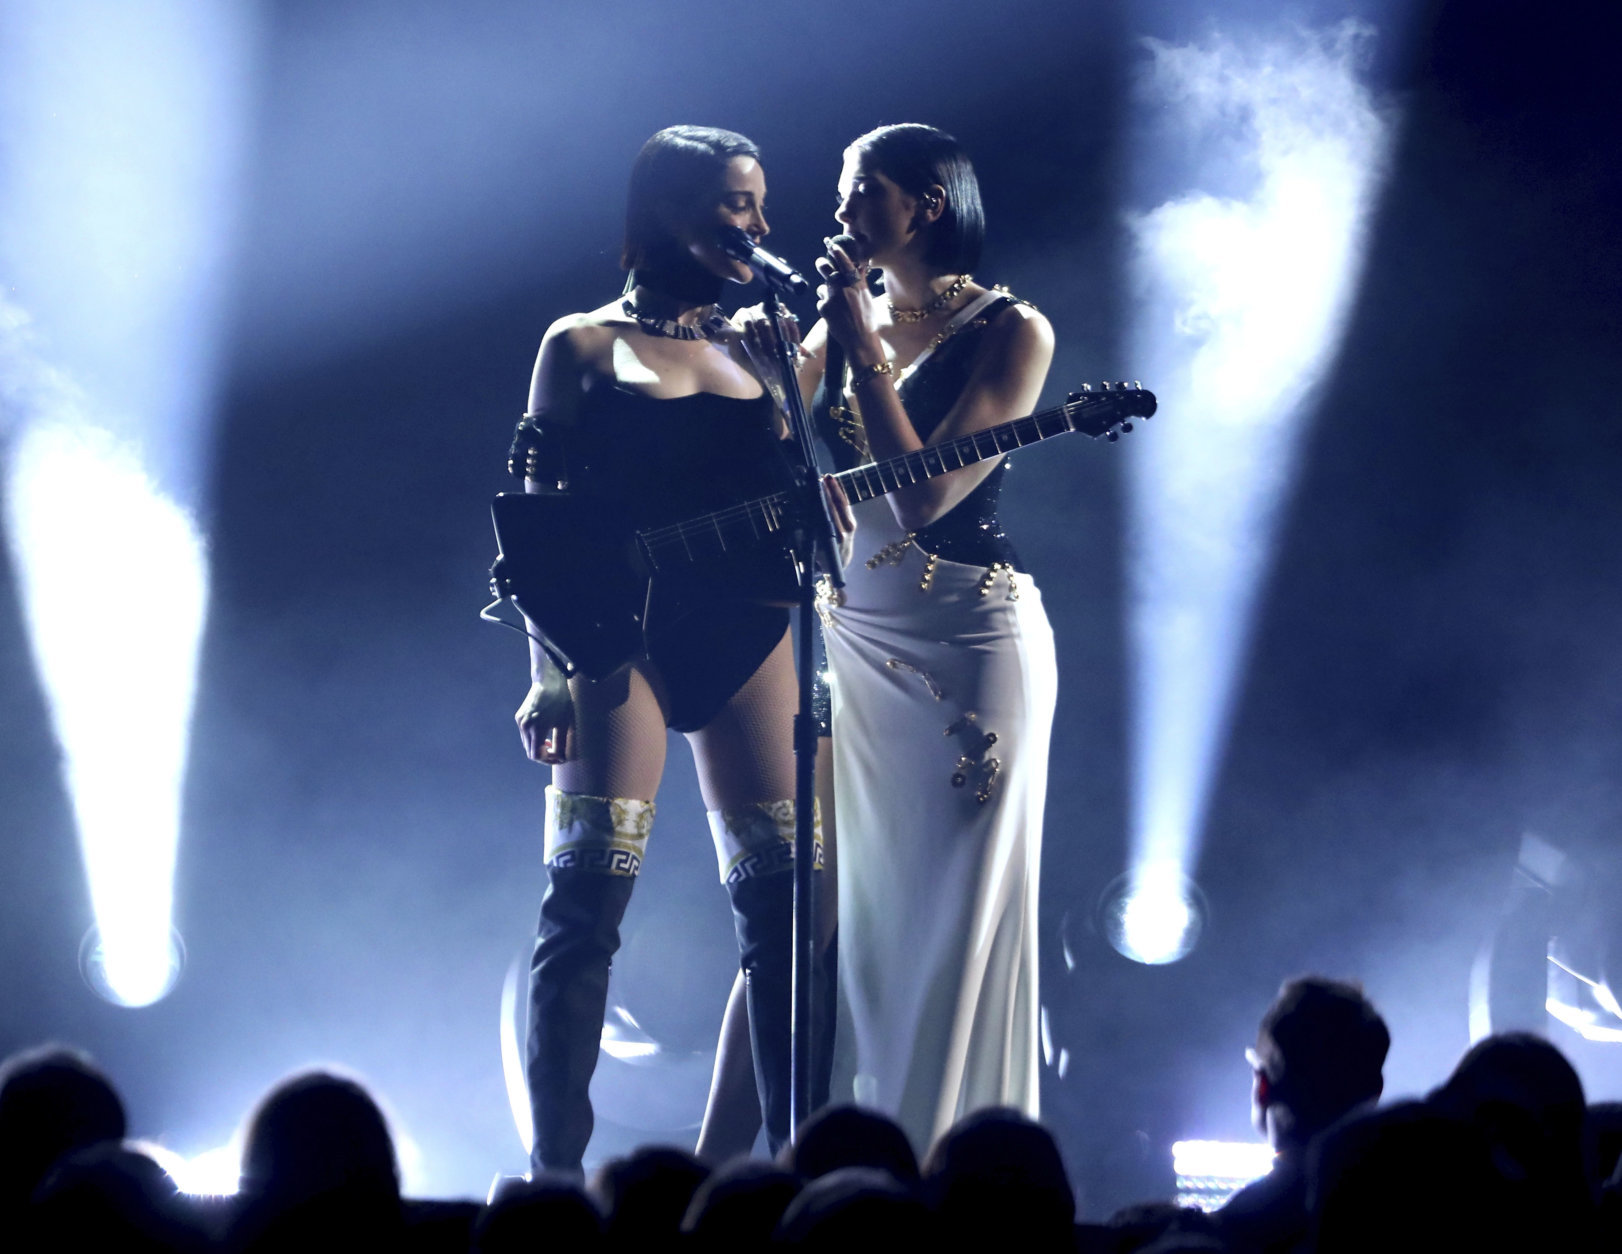 St. Vincent, left, and Dua Lipa perform a medley at the 61st annual Grammy Awards on Sunday, Feb. 10, 2019, in Los Angeles. (Photo by Matt Sayles/Invision/AP)